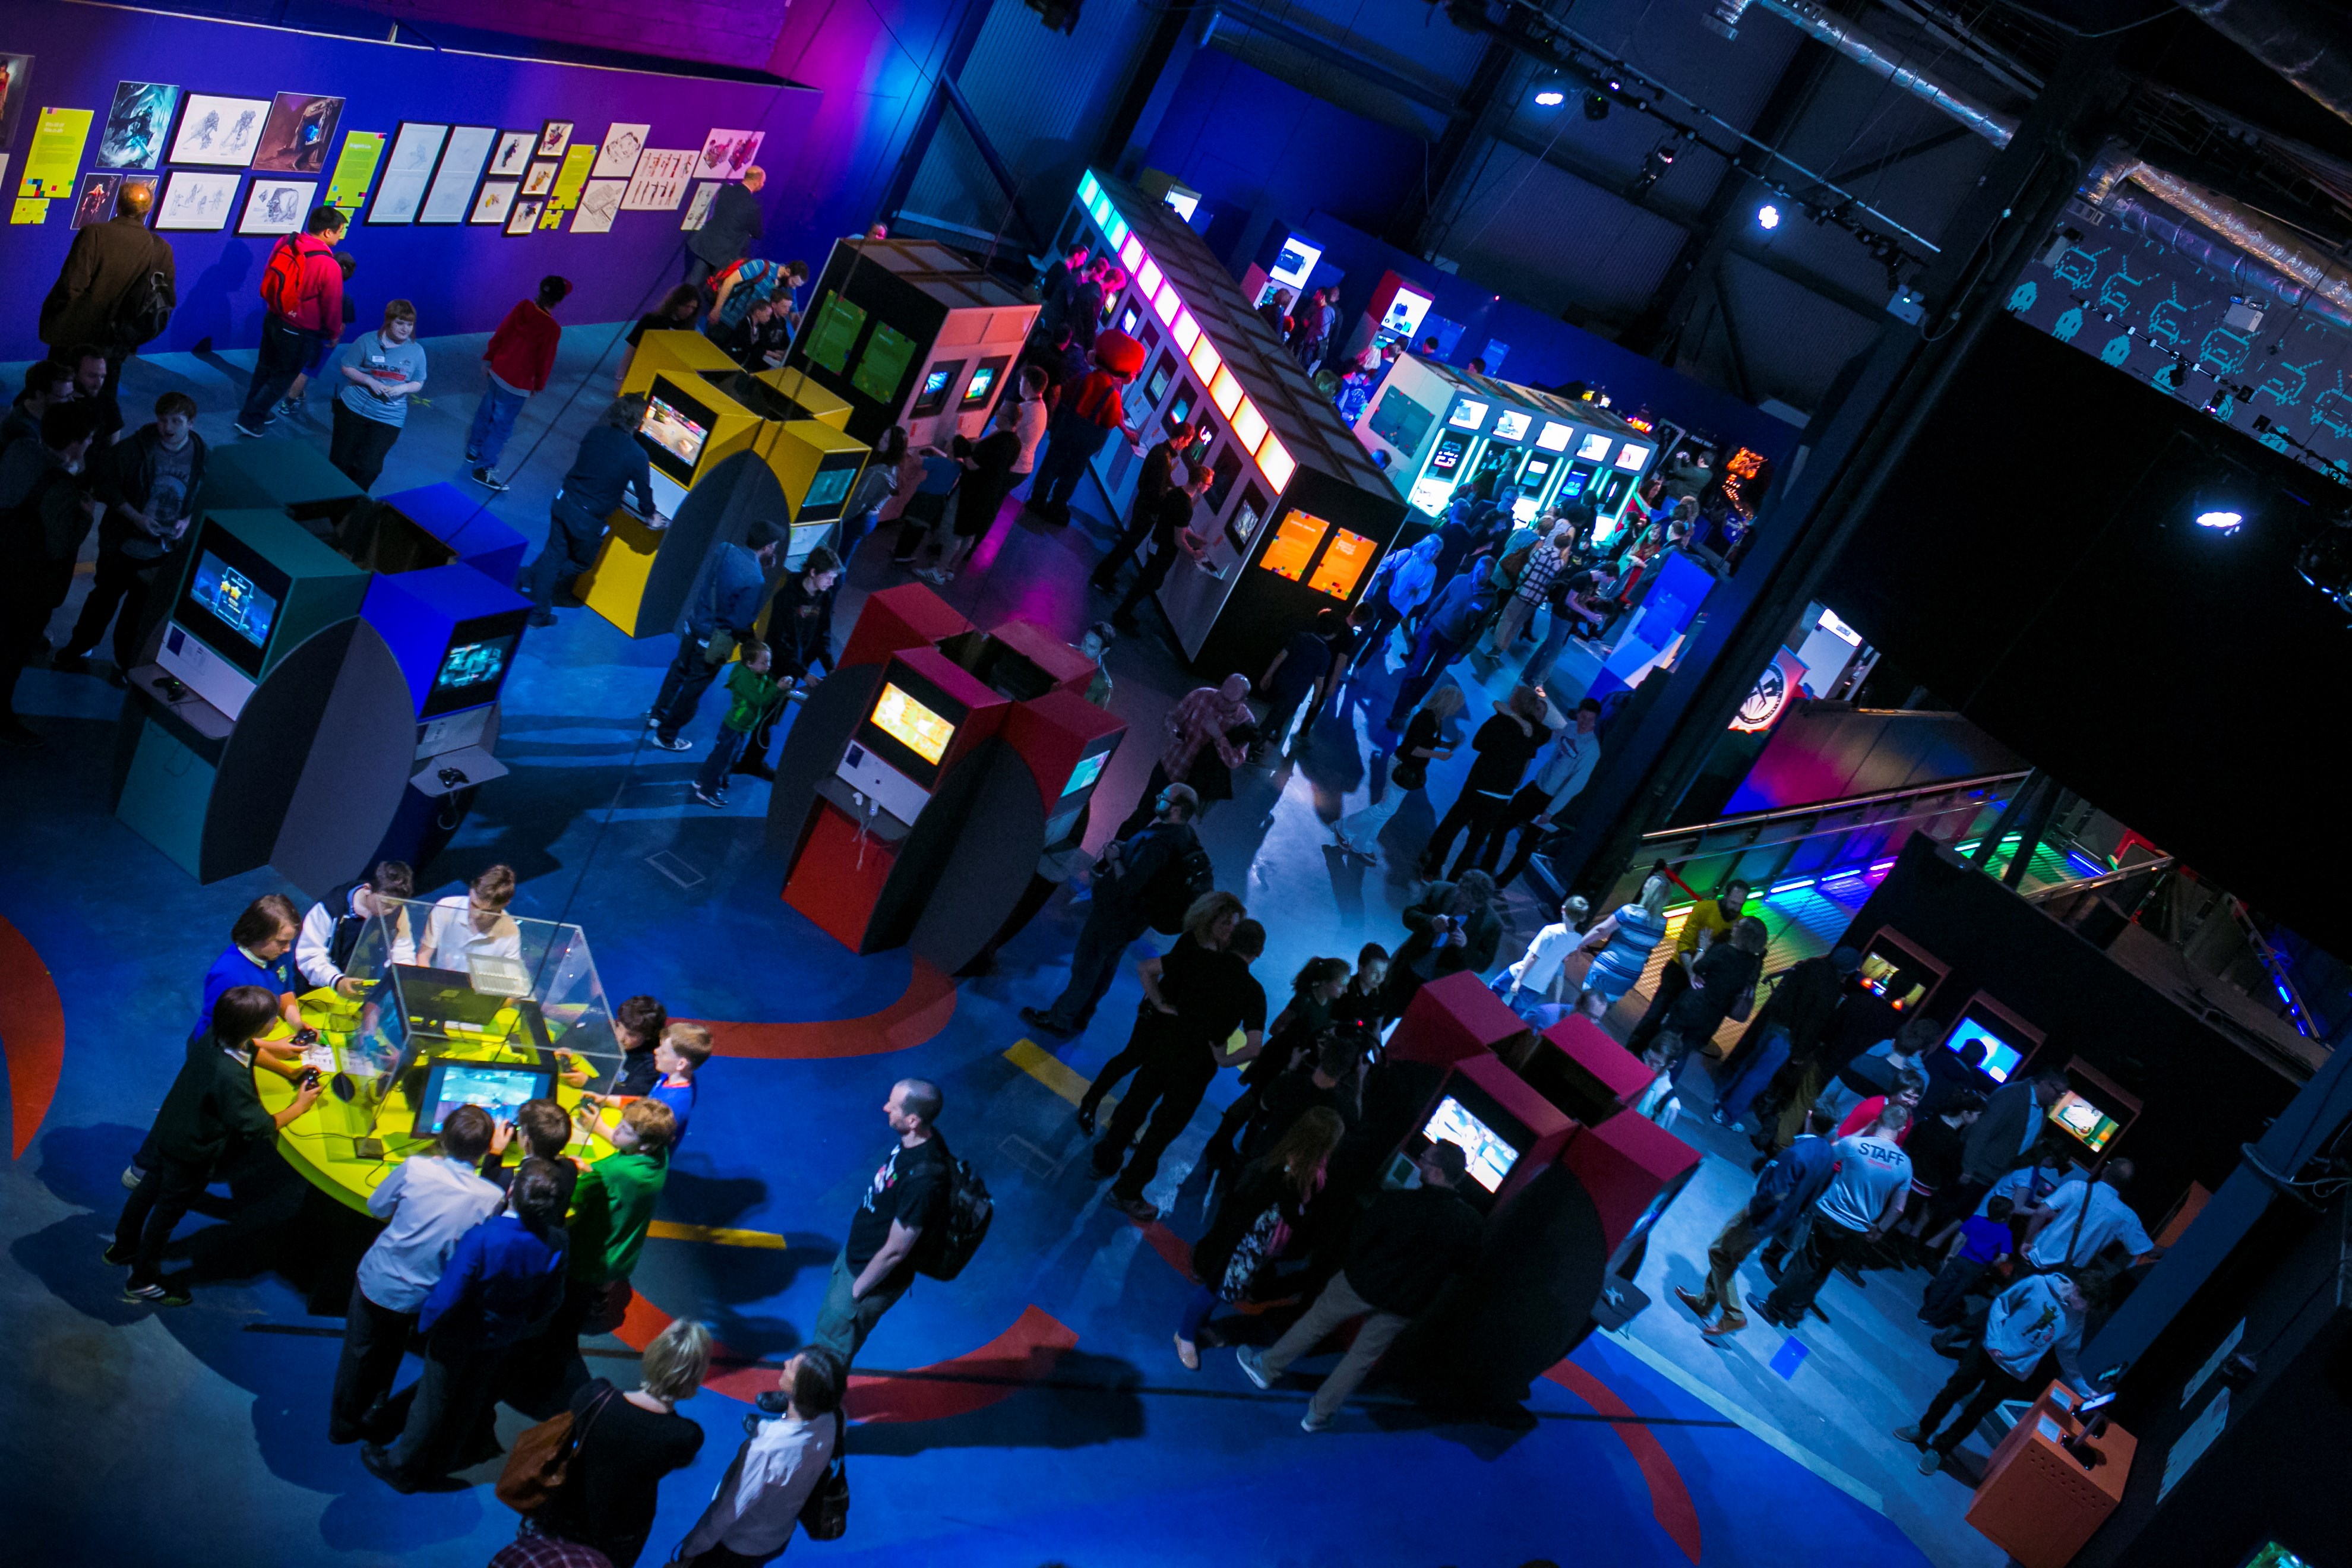 Visitors play with games and consoles across Game On within the exhibition space at Life in Newcastle.